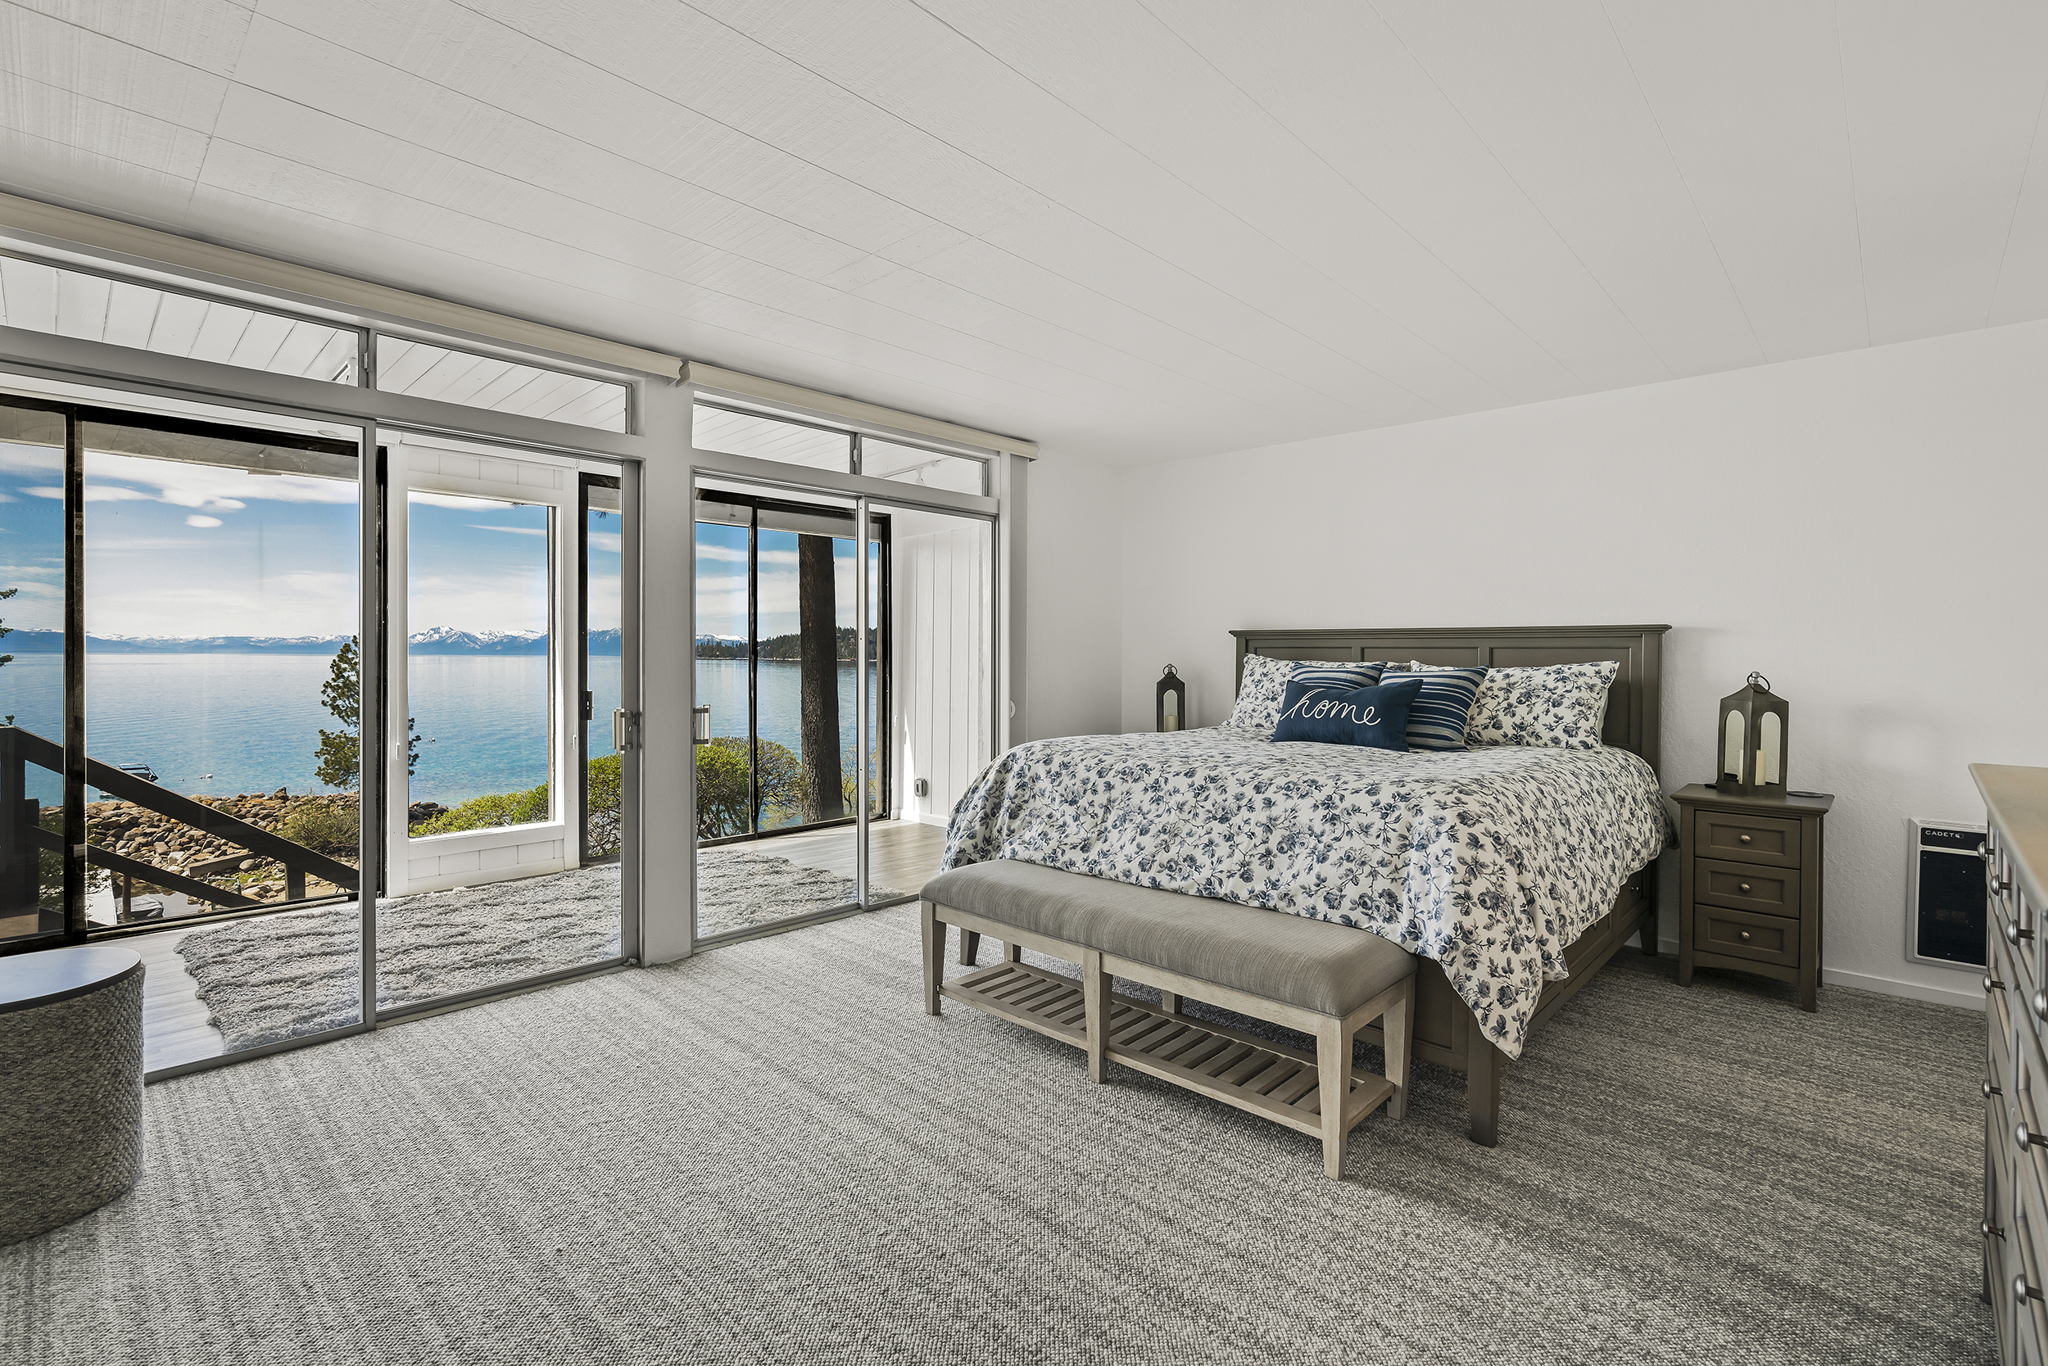 Master Bedroom With Sunroom and Gorgeous Lake View!